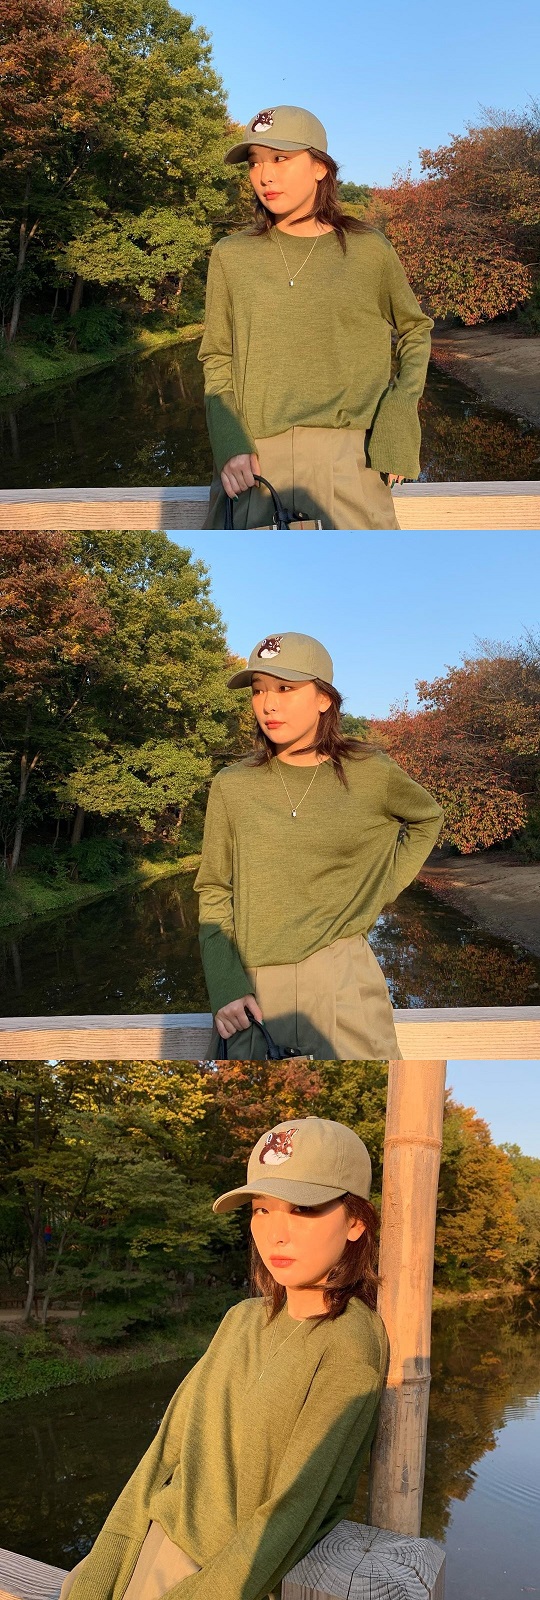 Seulgi showed off her cute plainclothes fashion.Group Red Velvet Seulgi posted three photos on his Instagram with an article called Toby.The photo shows Seulgi wearing a green top and khaki bottoms and matching khaki hats, and the visuals shining in unique fashion thrilled fans.When the photos were released, netizens responded in various ways such as green looks good, fashion sense, my sister and cute.On the other hand, the group Red Velvet, which Seulgi belongs to, was active in August with the release of the new song Sonic Wave.Photo: Seulgi Instagram